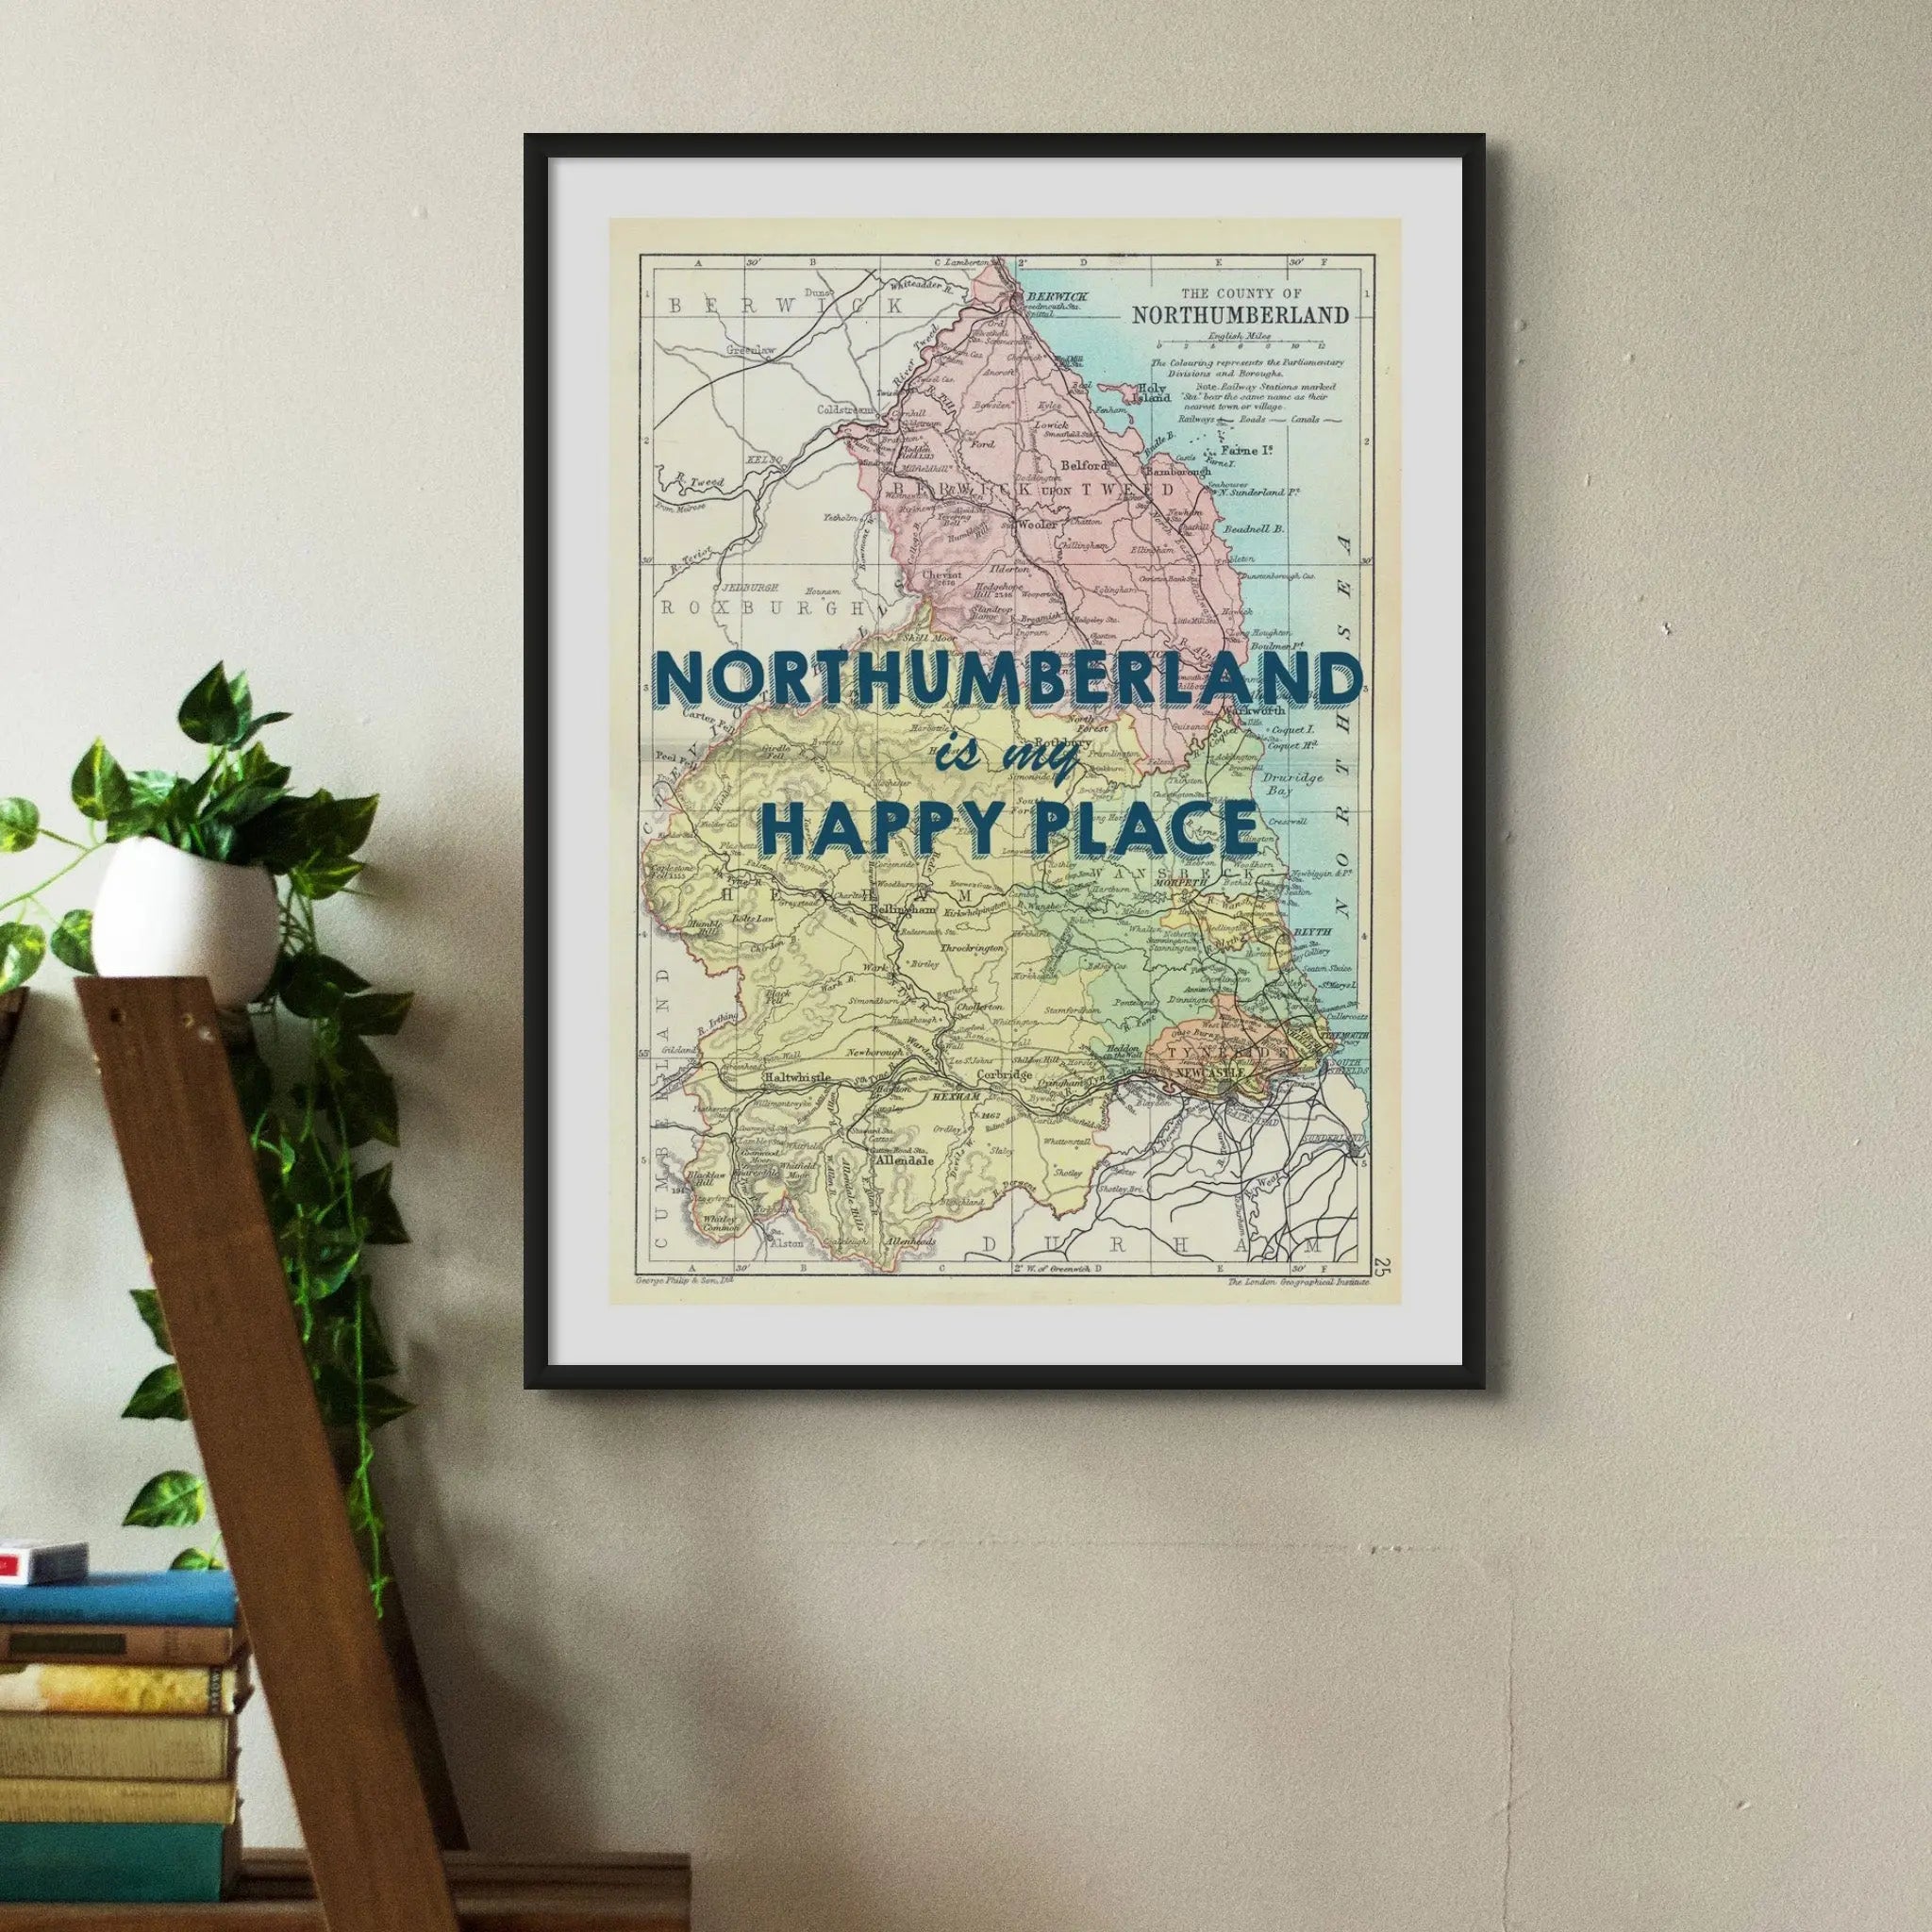 New Hampshire - Art Print or Canvas  State map art, Map art print, Art  prints